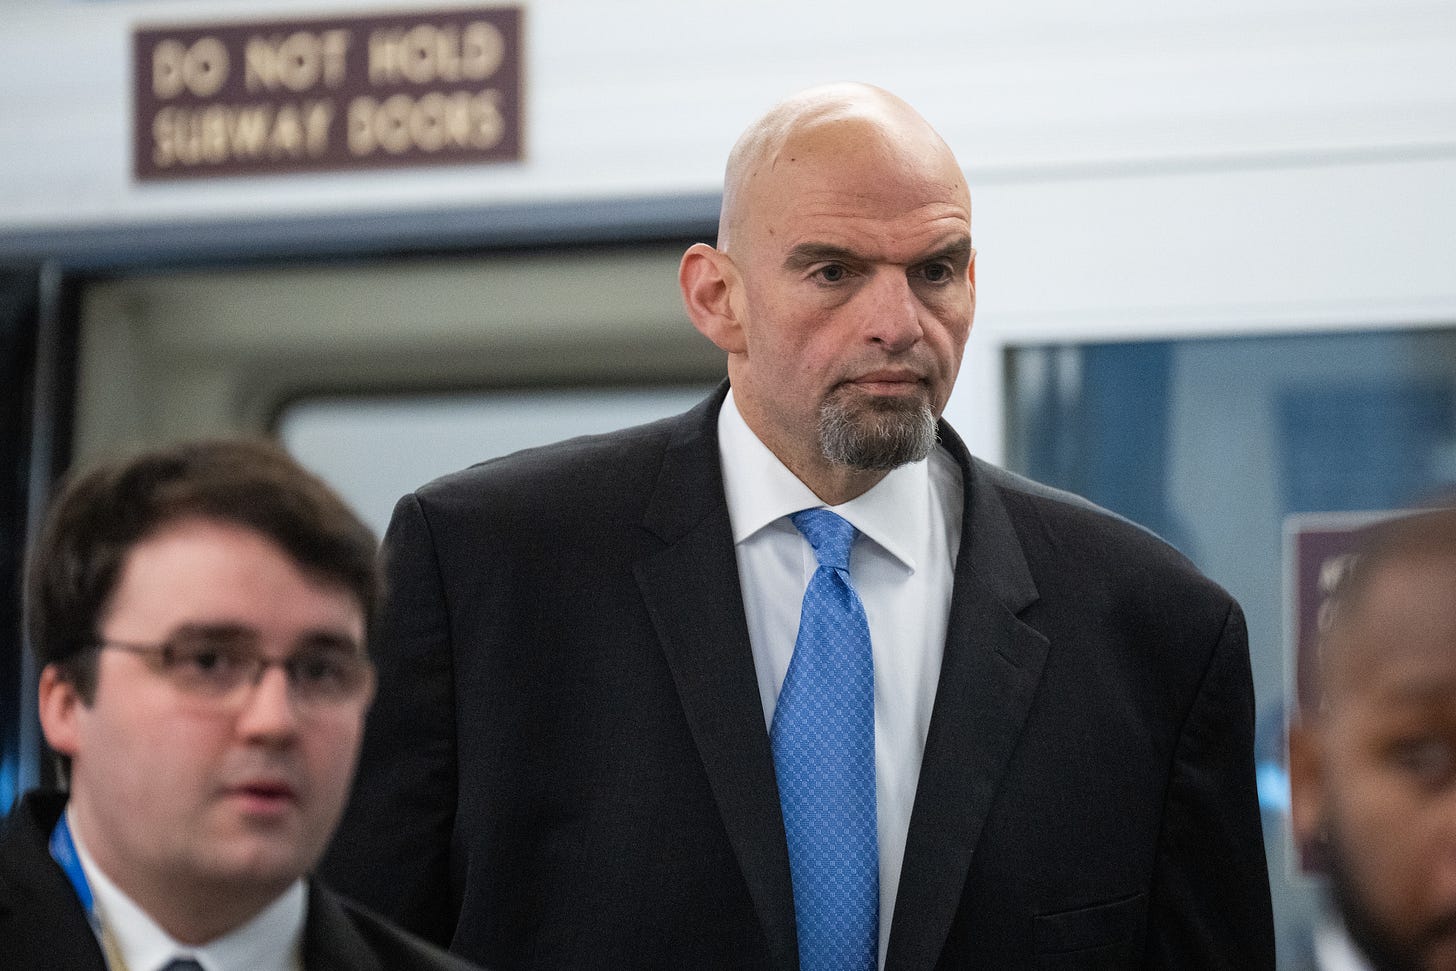 Fetterman hospitalized for treatment of depression - Roll Call